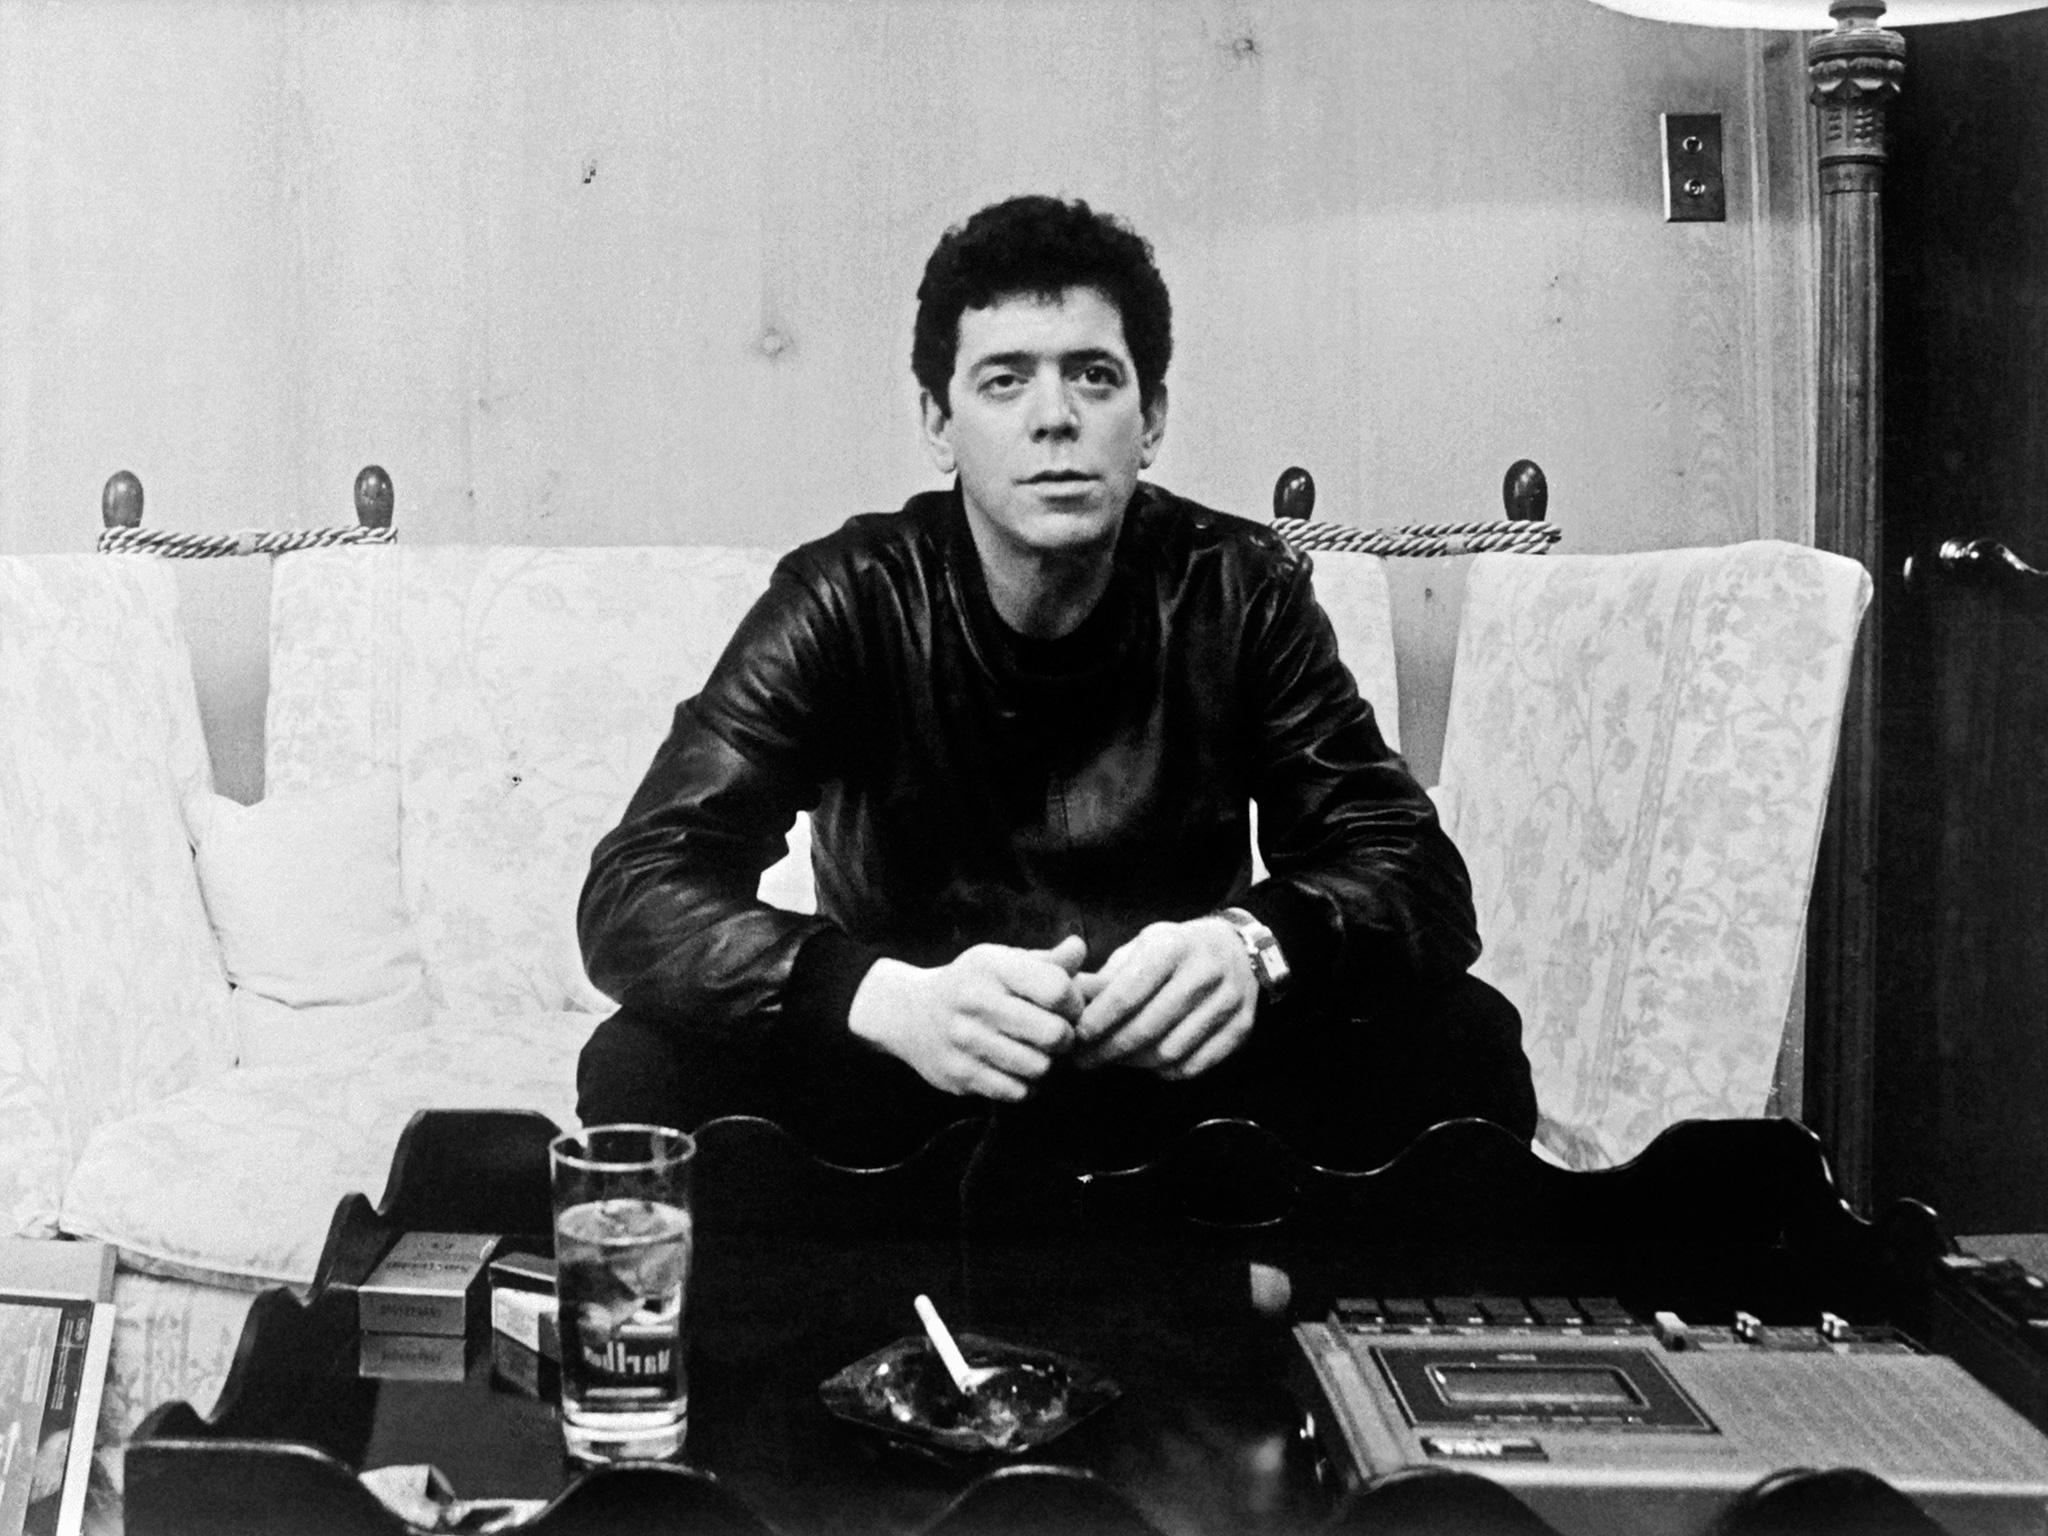 Lou Reed distorted the truth about his upbringing, and since his death in 2013, biographers and memoirists have added to the myths